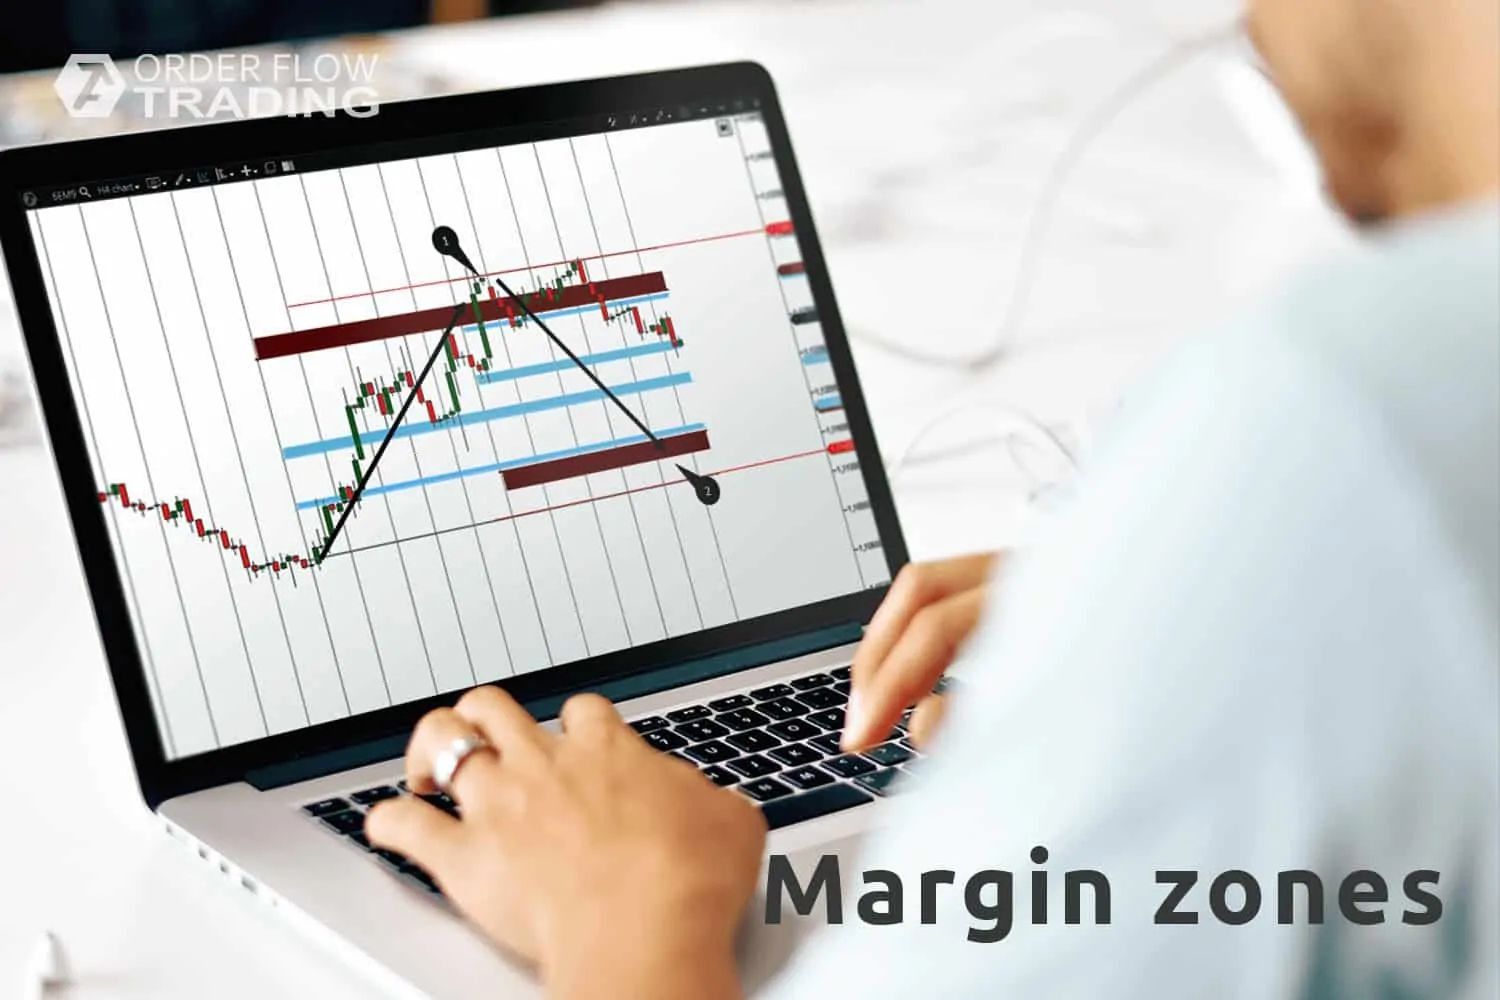 Market margin. A strategy example with an indicator.